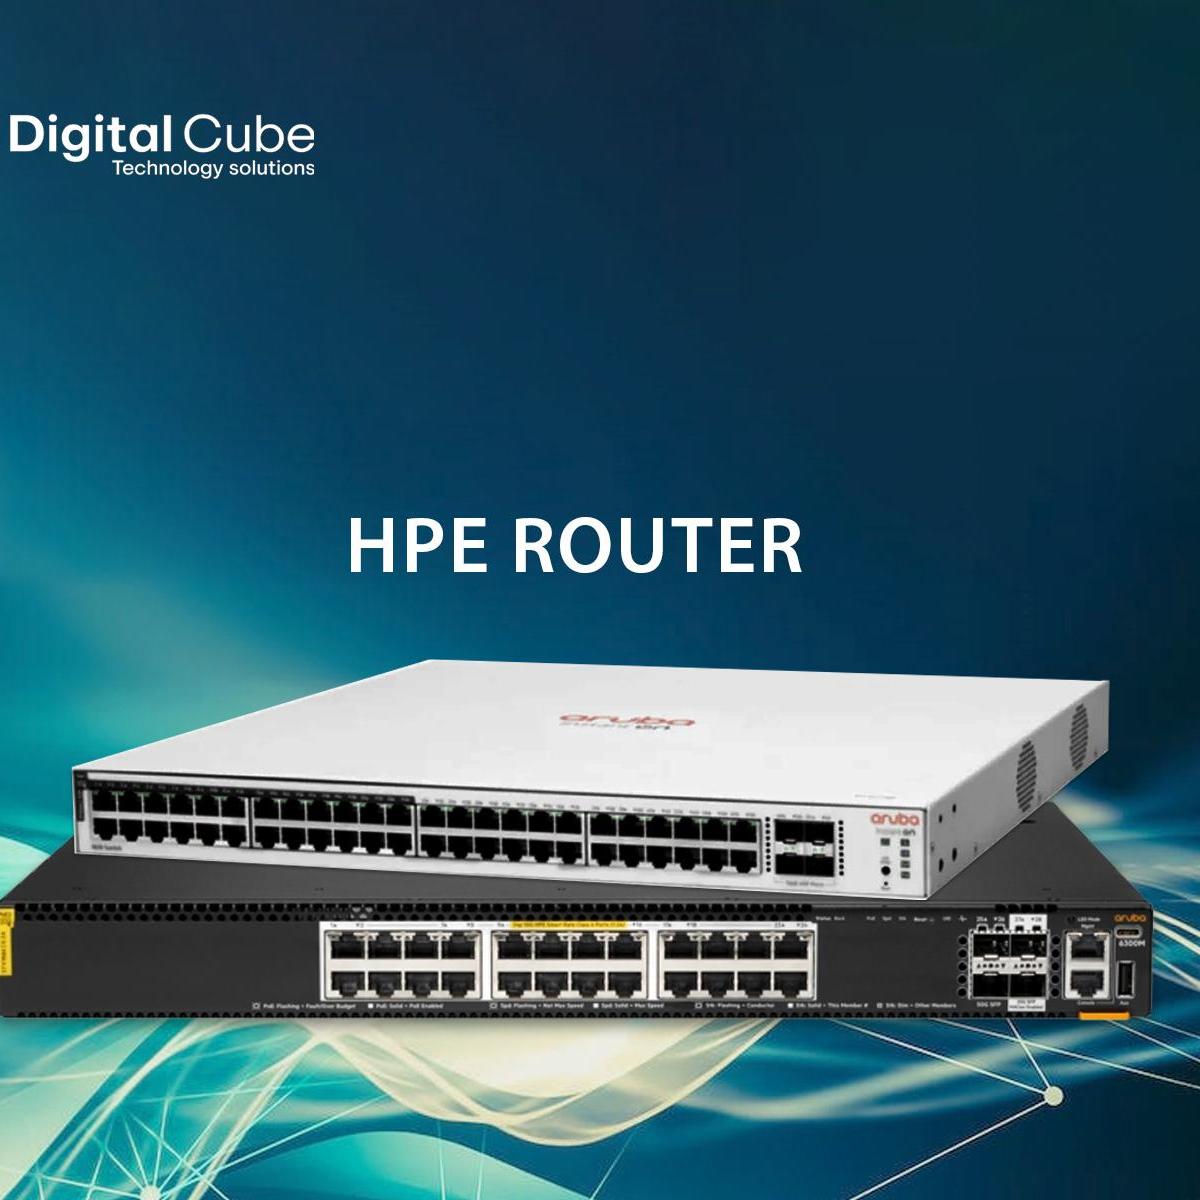 HPE Router